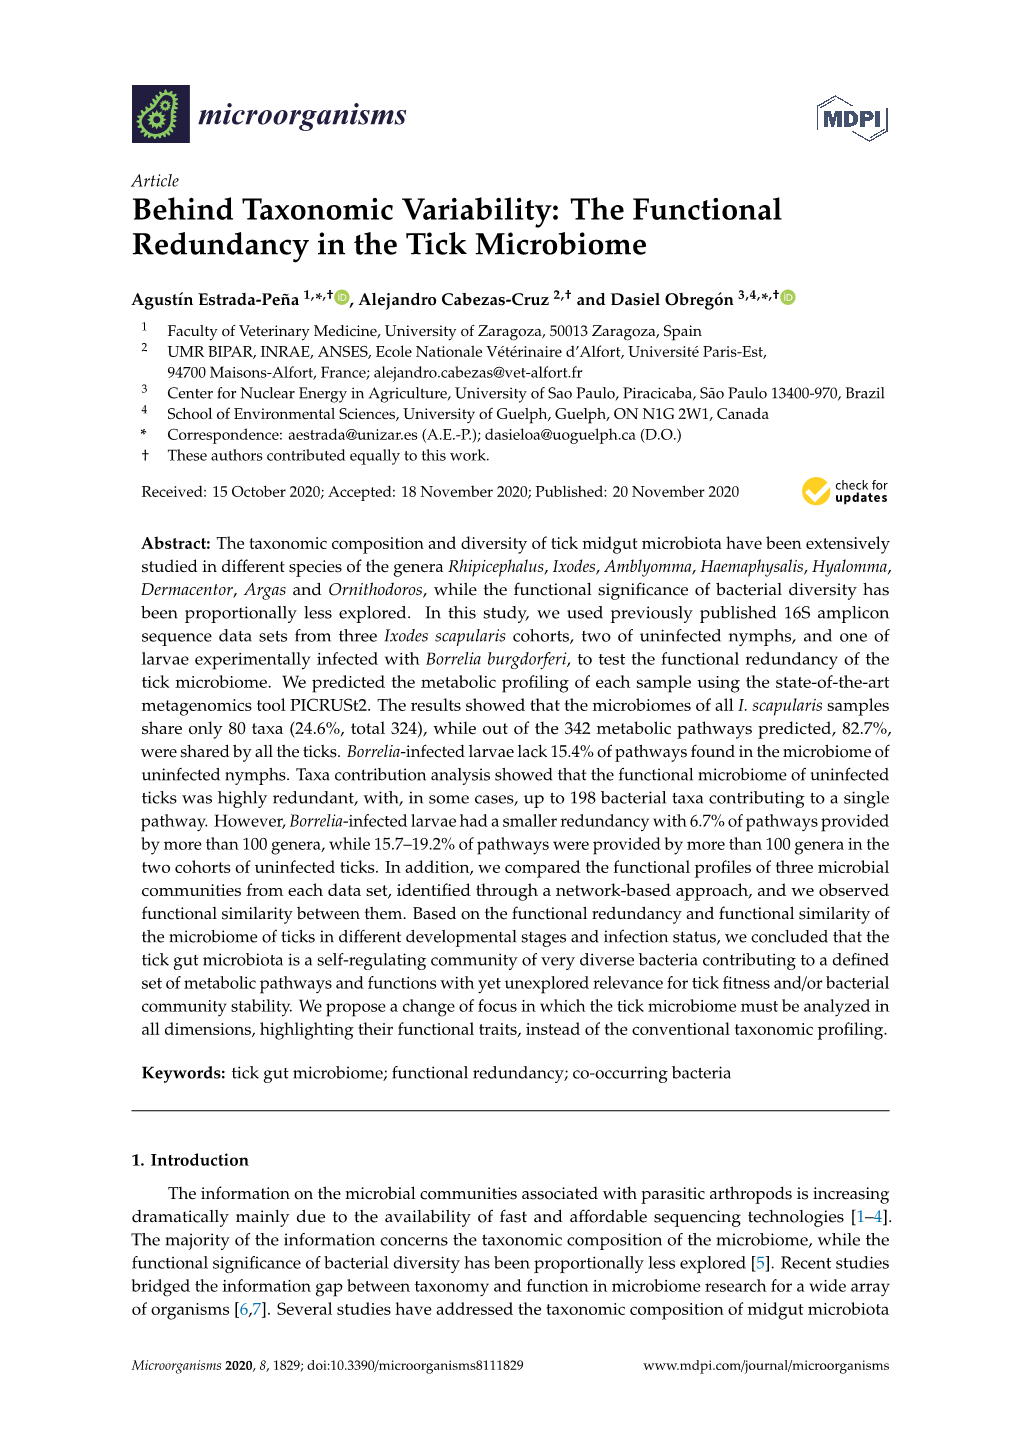 Behind Taxonomic Variability: the Functional Redundancy in the Tick Microbiome